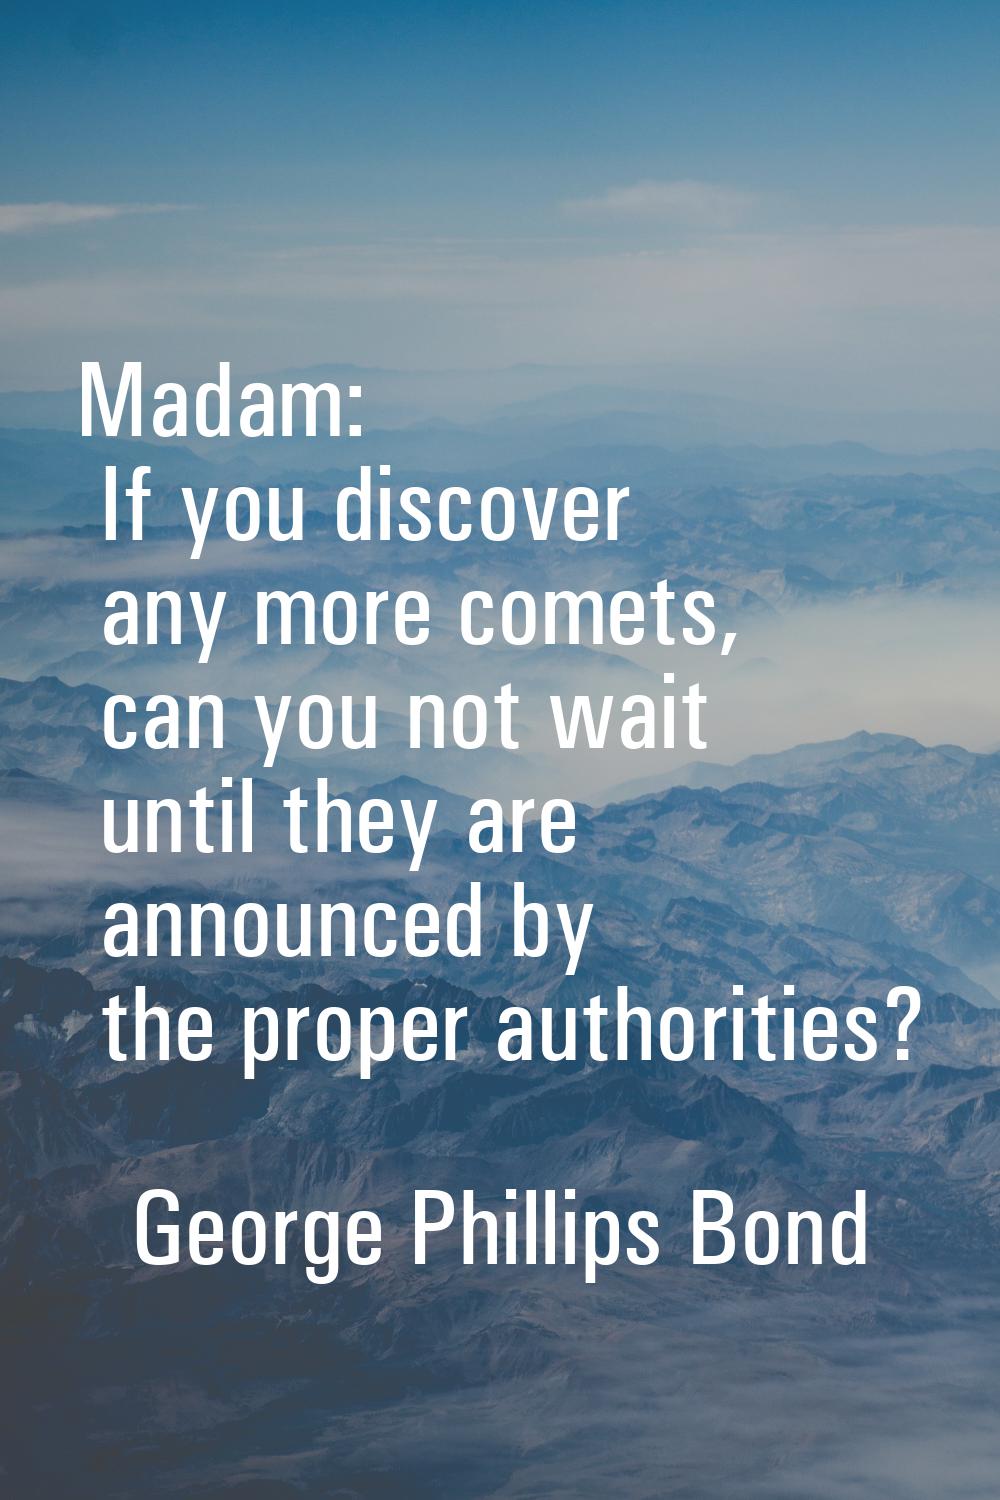 Madam: If you discover any more comets, can you not wait until they are announced by the proper aut